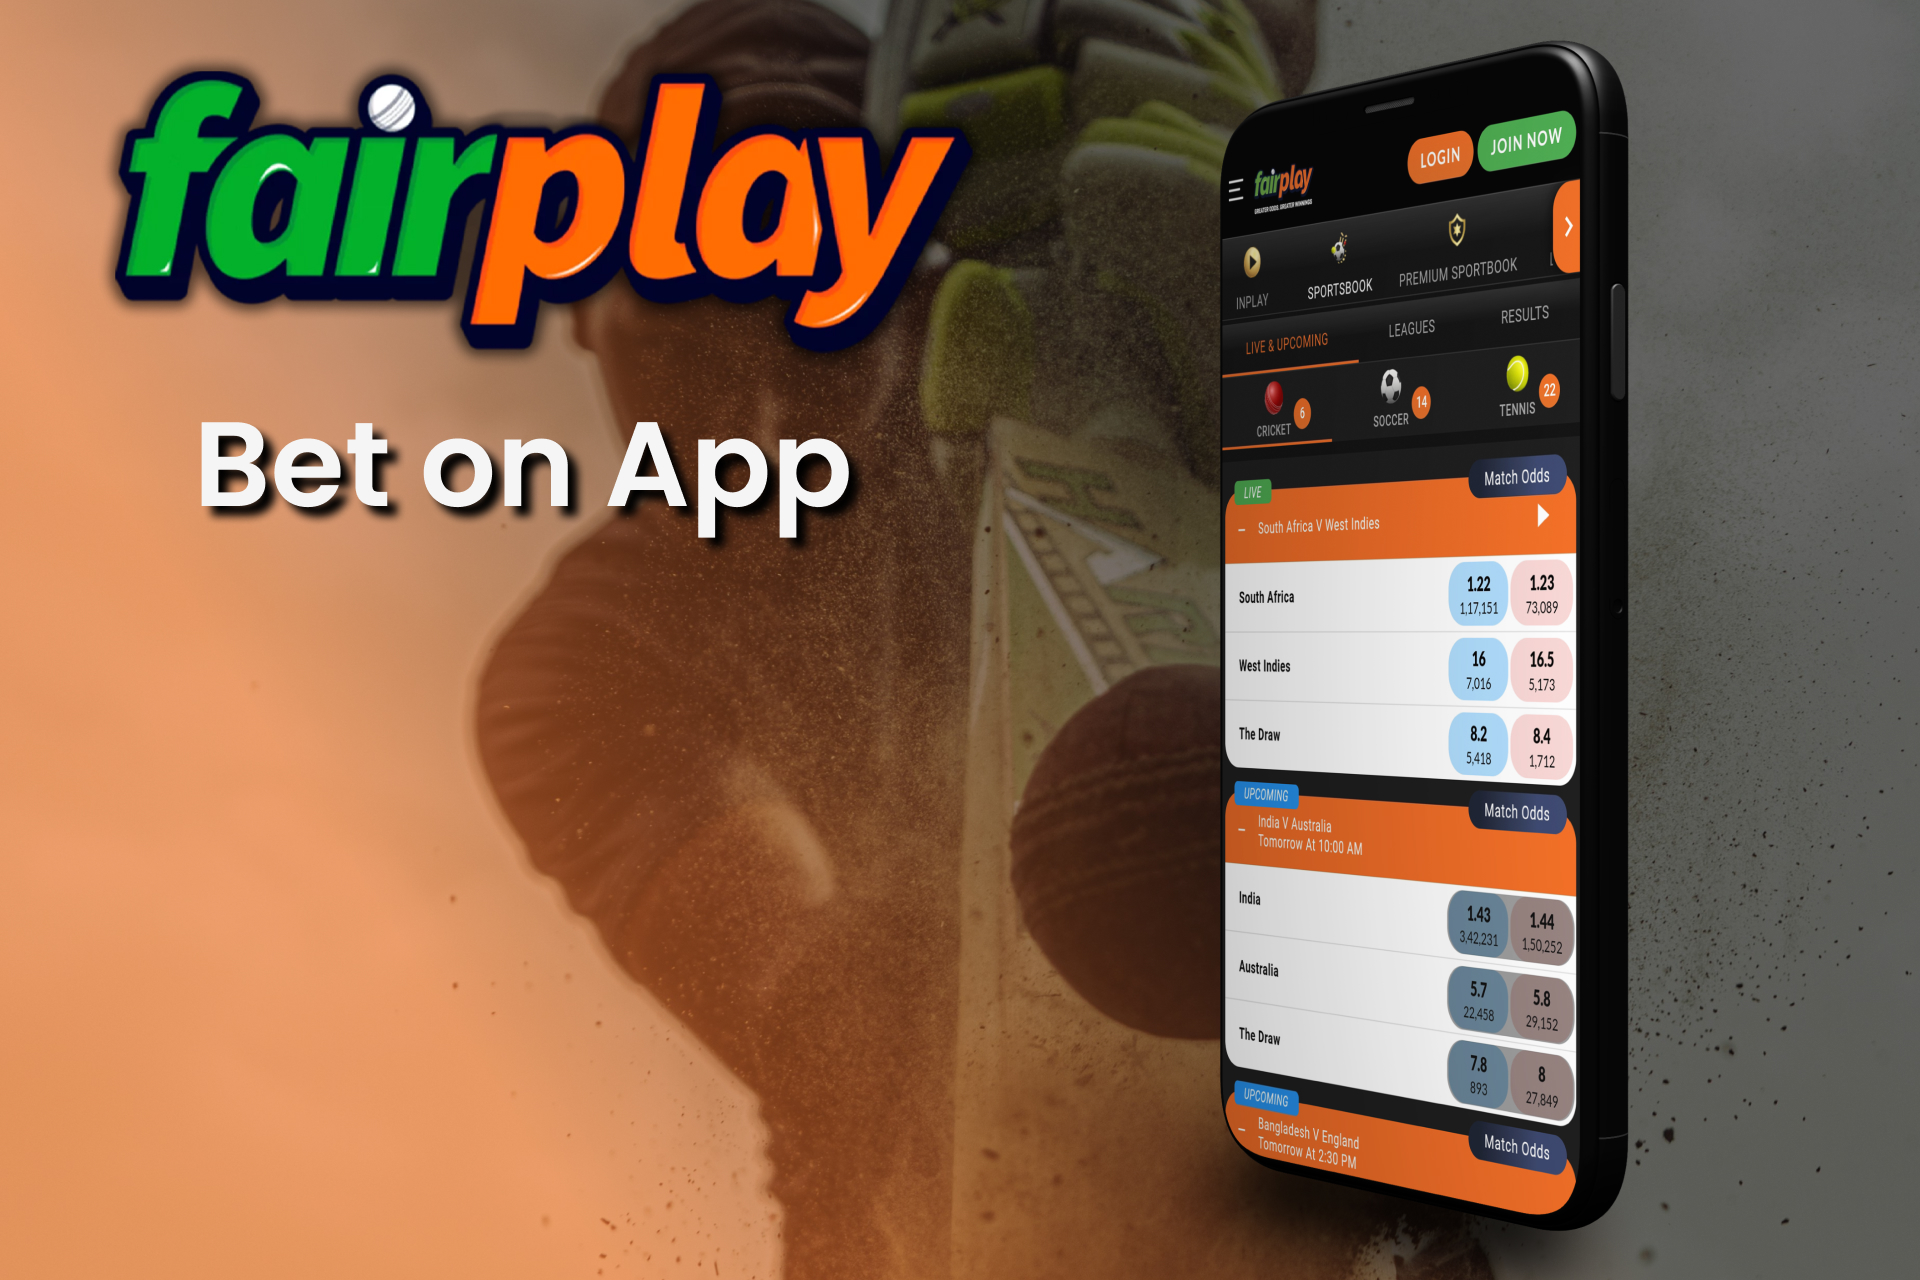 Bet on IPL on your phone with Fairplay.